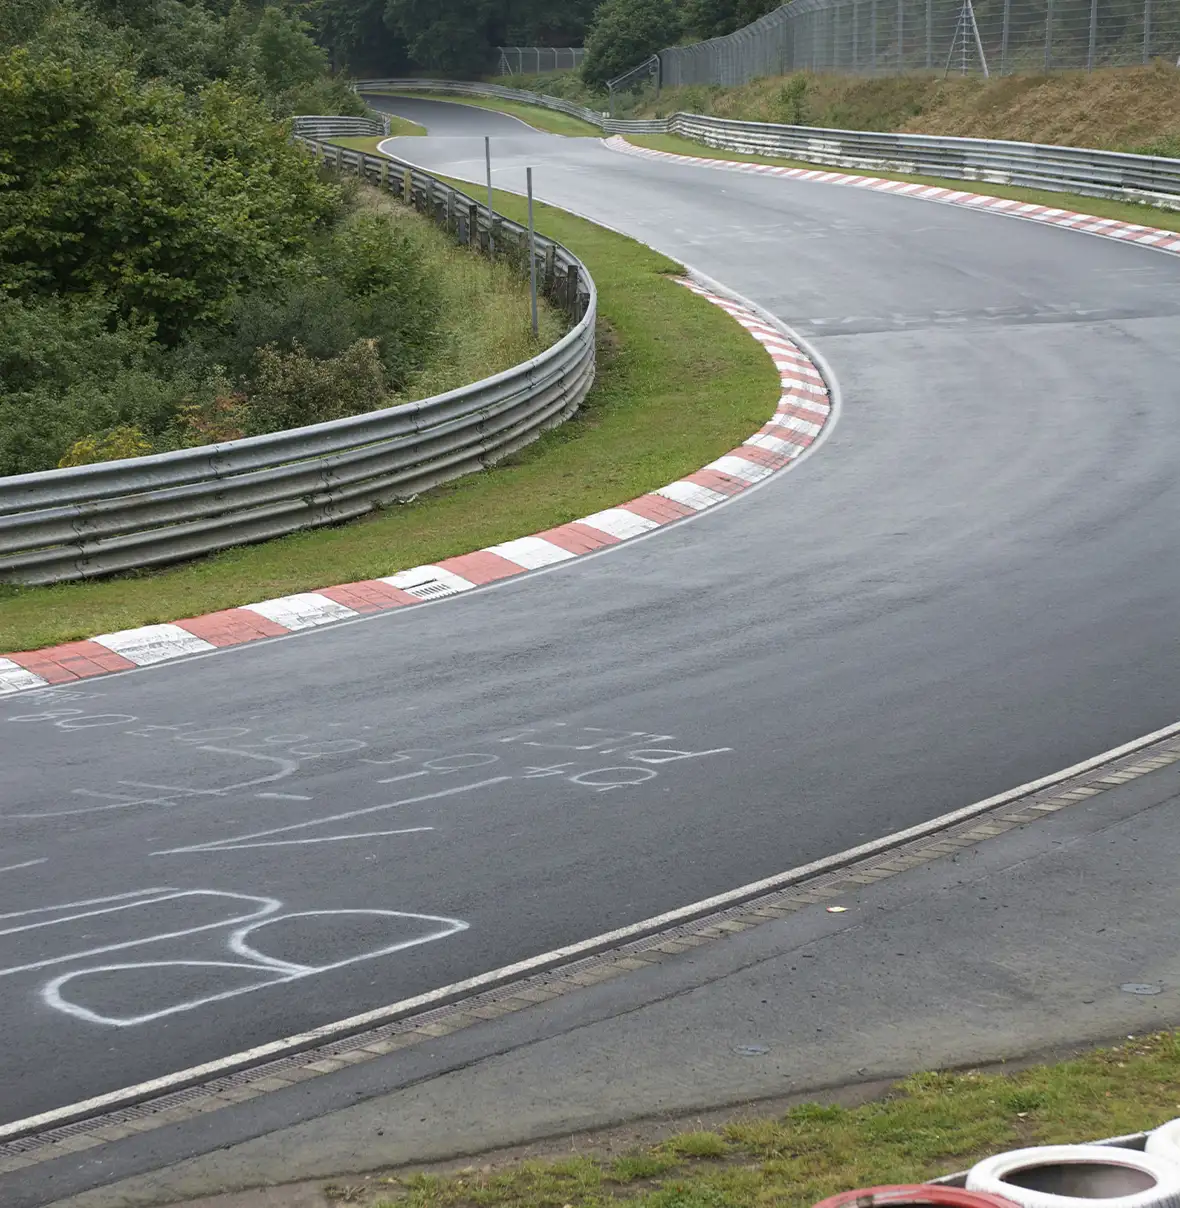 View of the corner on the Nürburgring circuit surrounded by trees